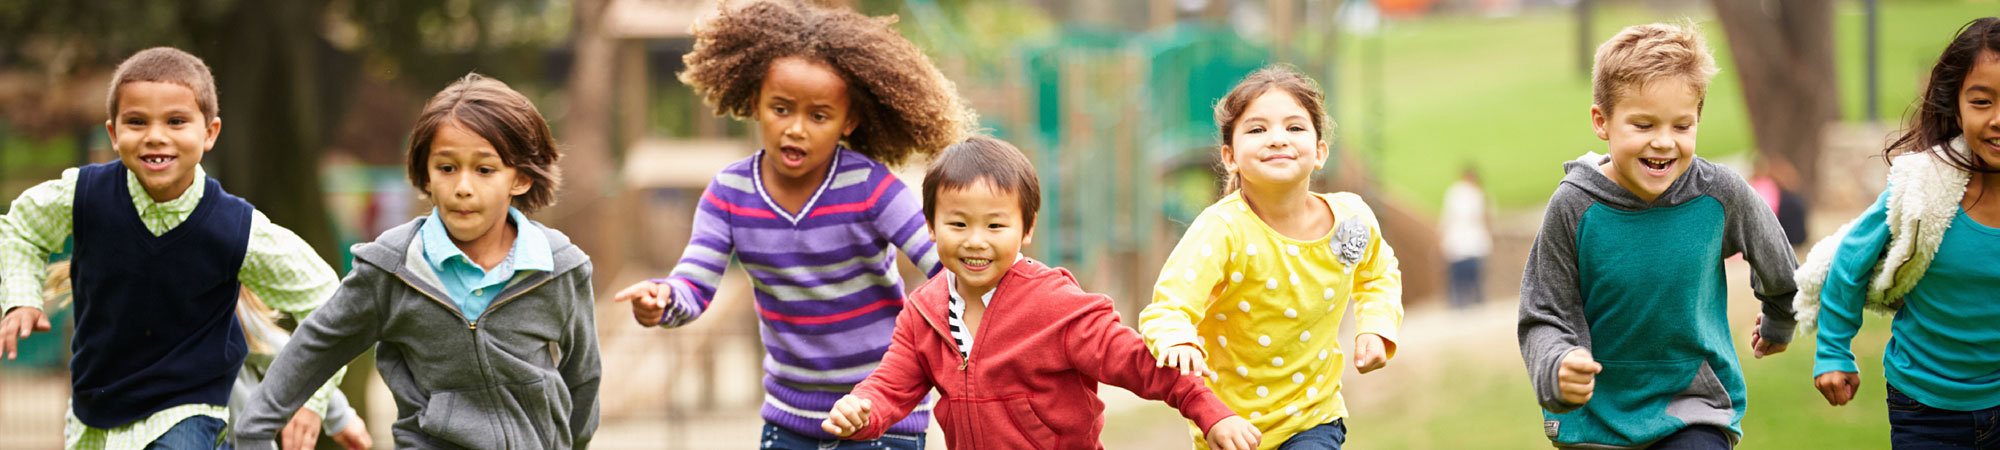 home page header of kids running